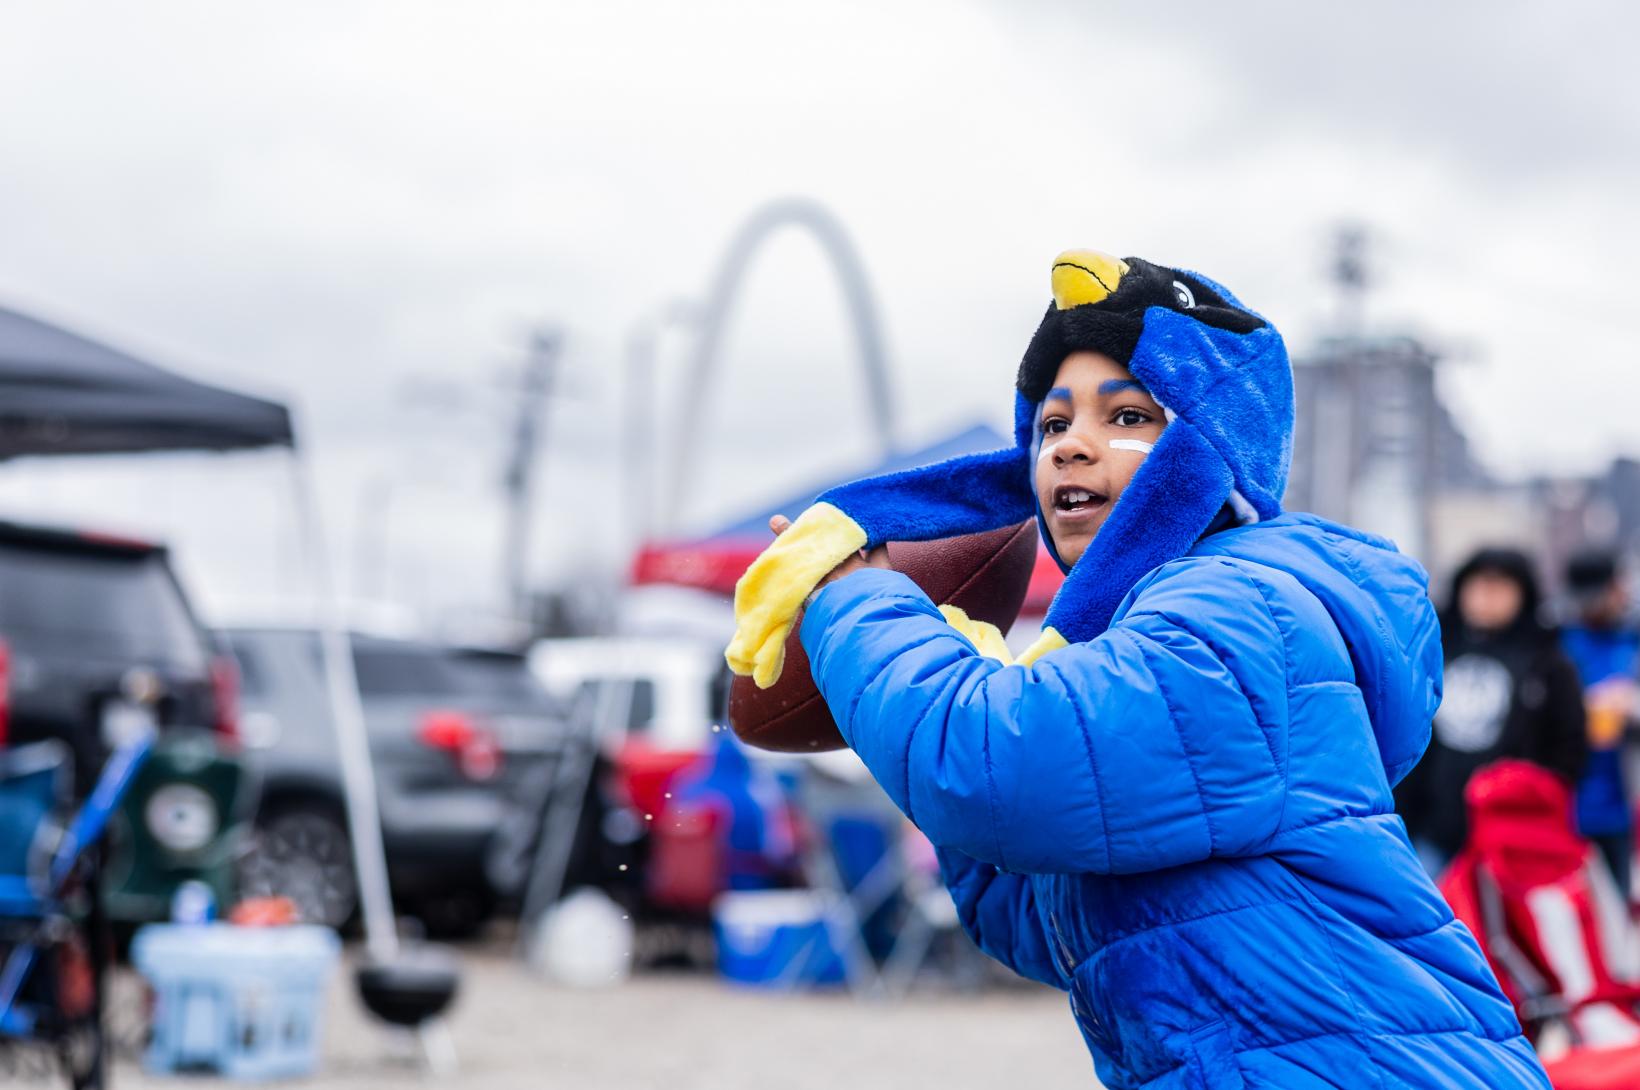 Young STL Battlehawks Fan in a Blue jacket throwing a football with the St. Louis Arch in the background before a Battlehawks Football Game